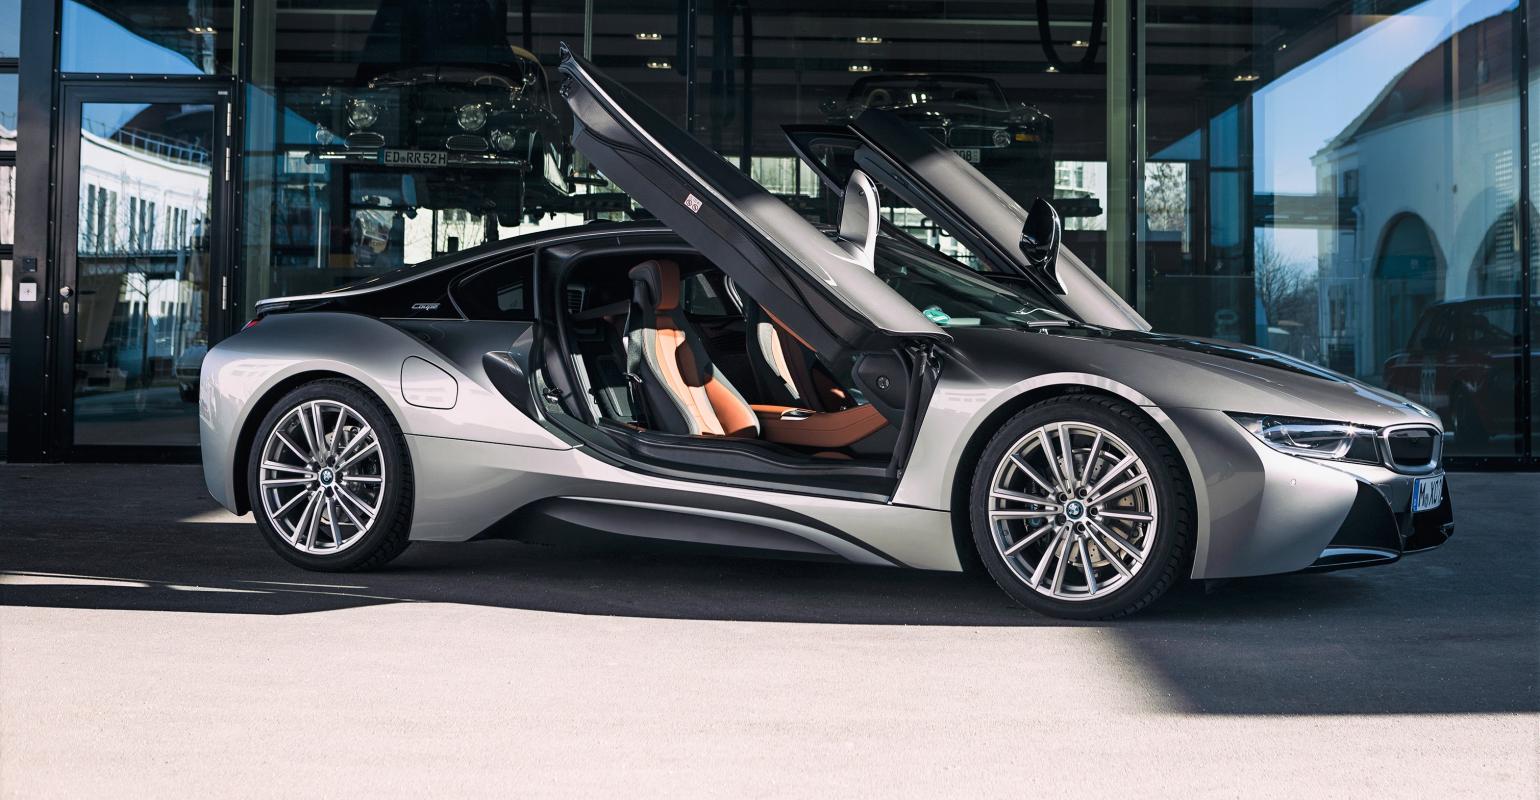 BMW i8 to Cease Production in April | WardsAuto